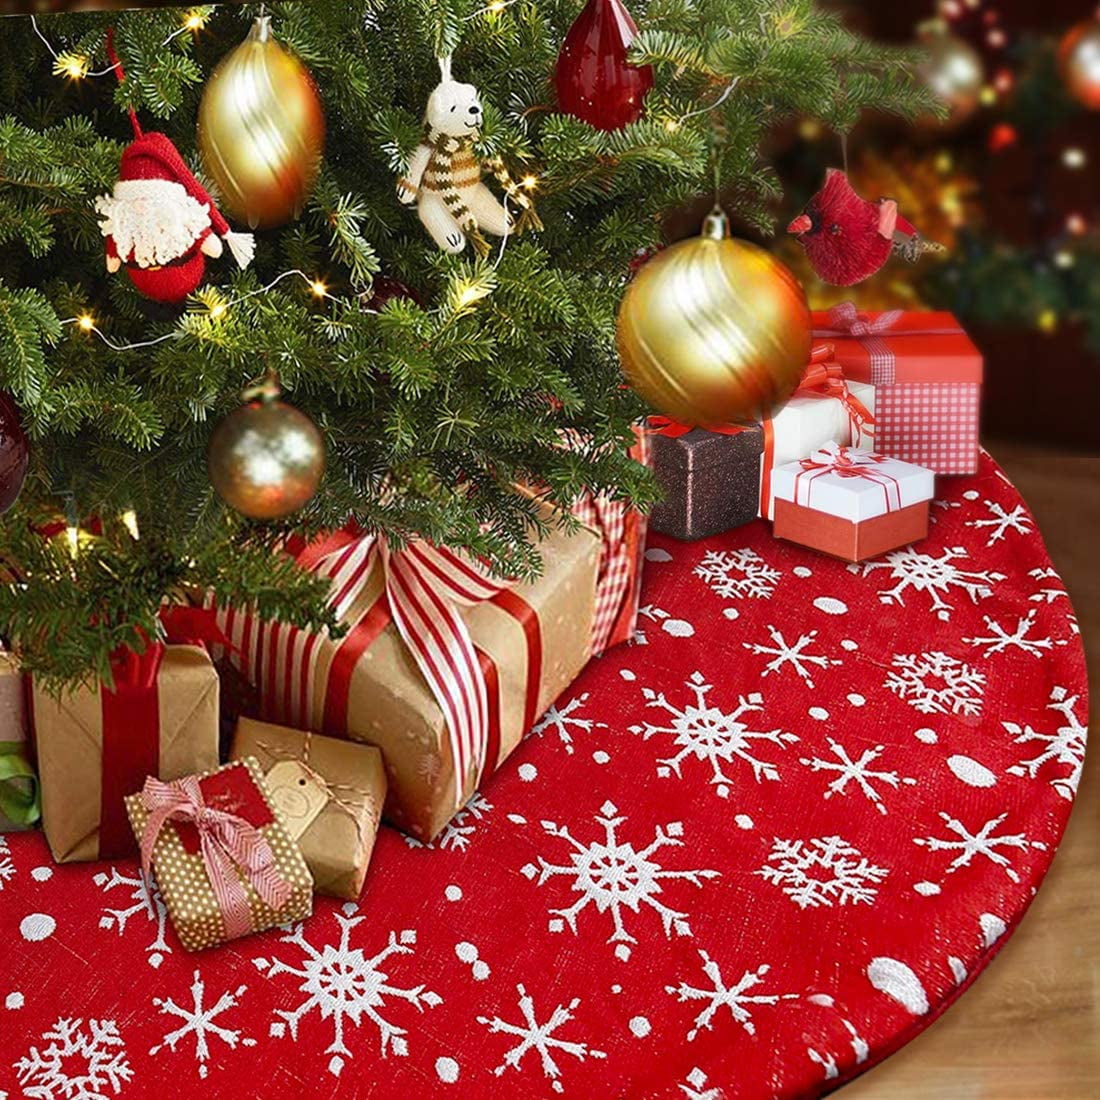 Details about   100cm Large Christmas Tree Skirt Red Home Xmas Floor Ornament Party Decor